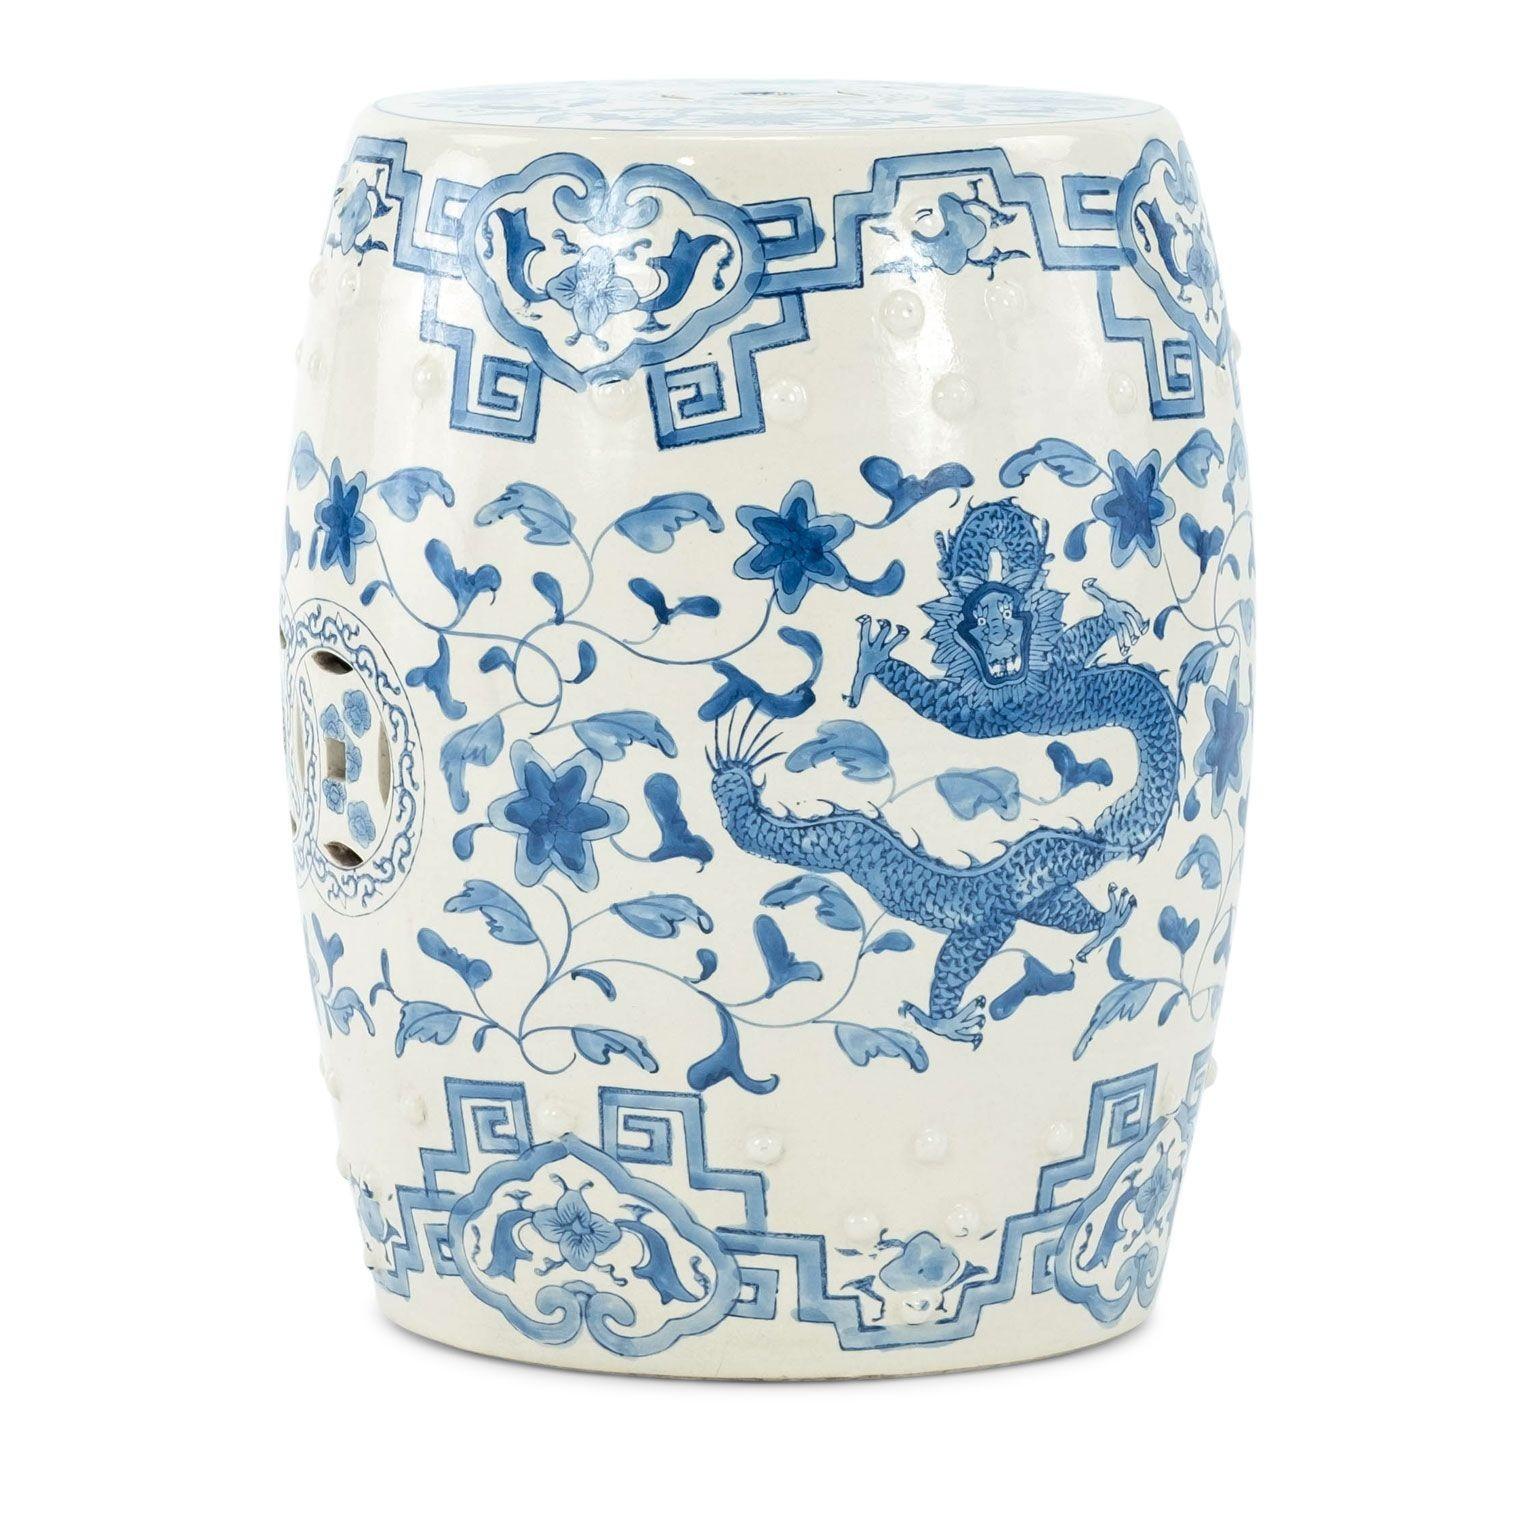 Chinese Export Blue and White Porcelain Garden Seat